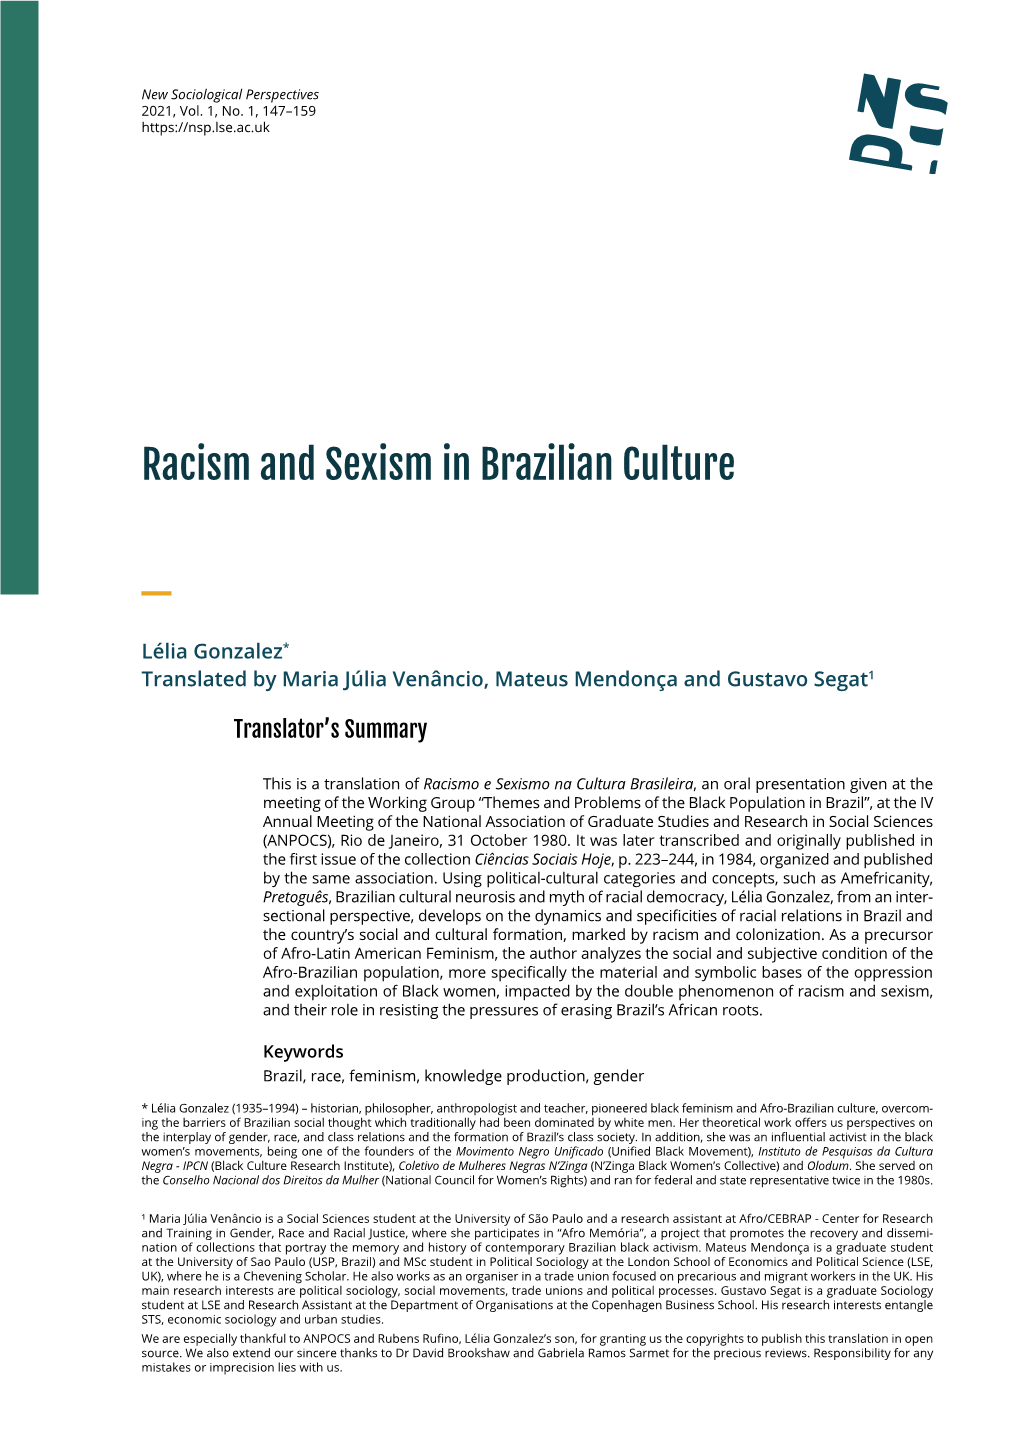 Racism and Sexism in Brazilian Culture